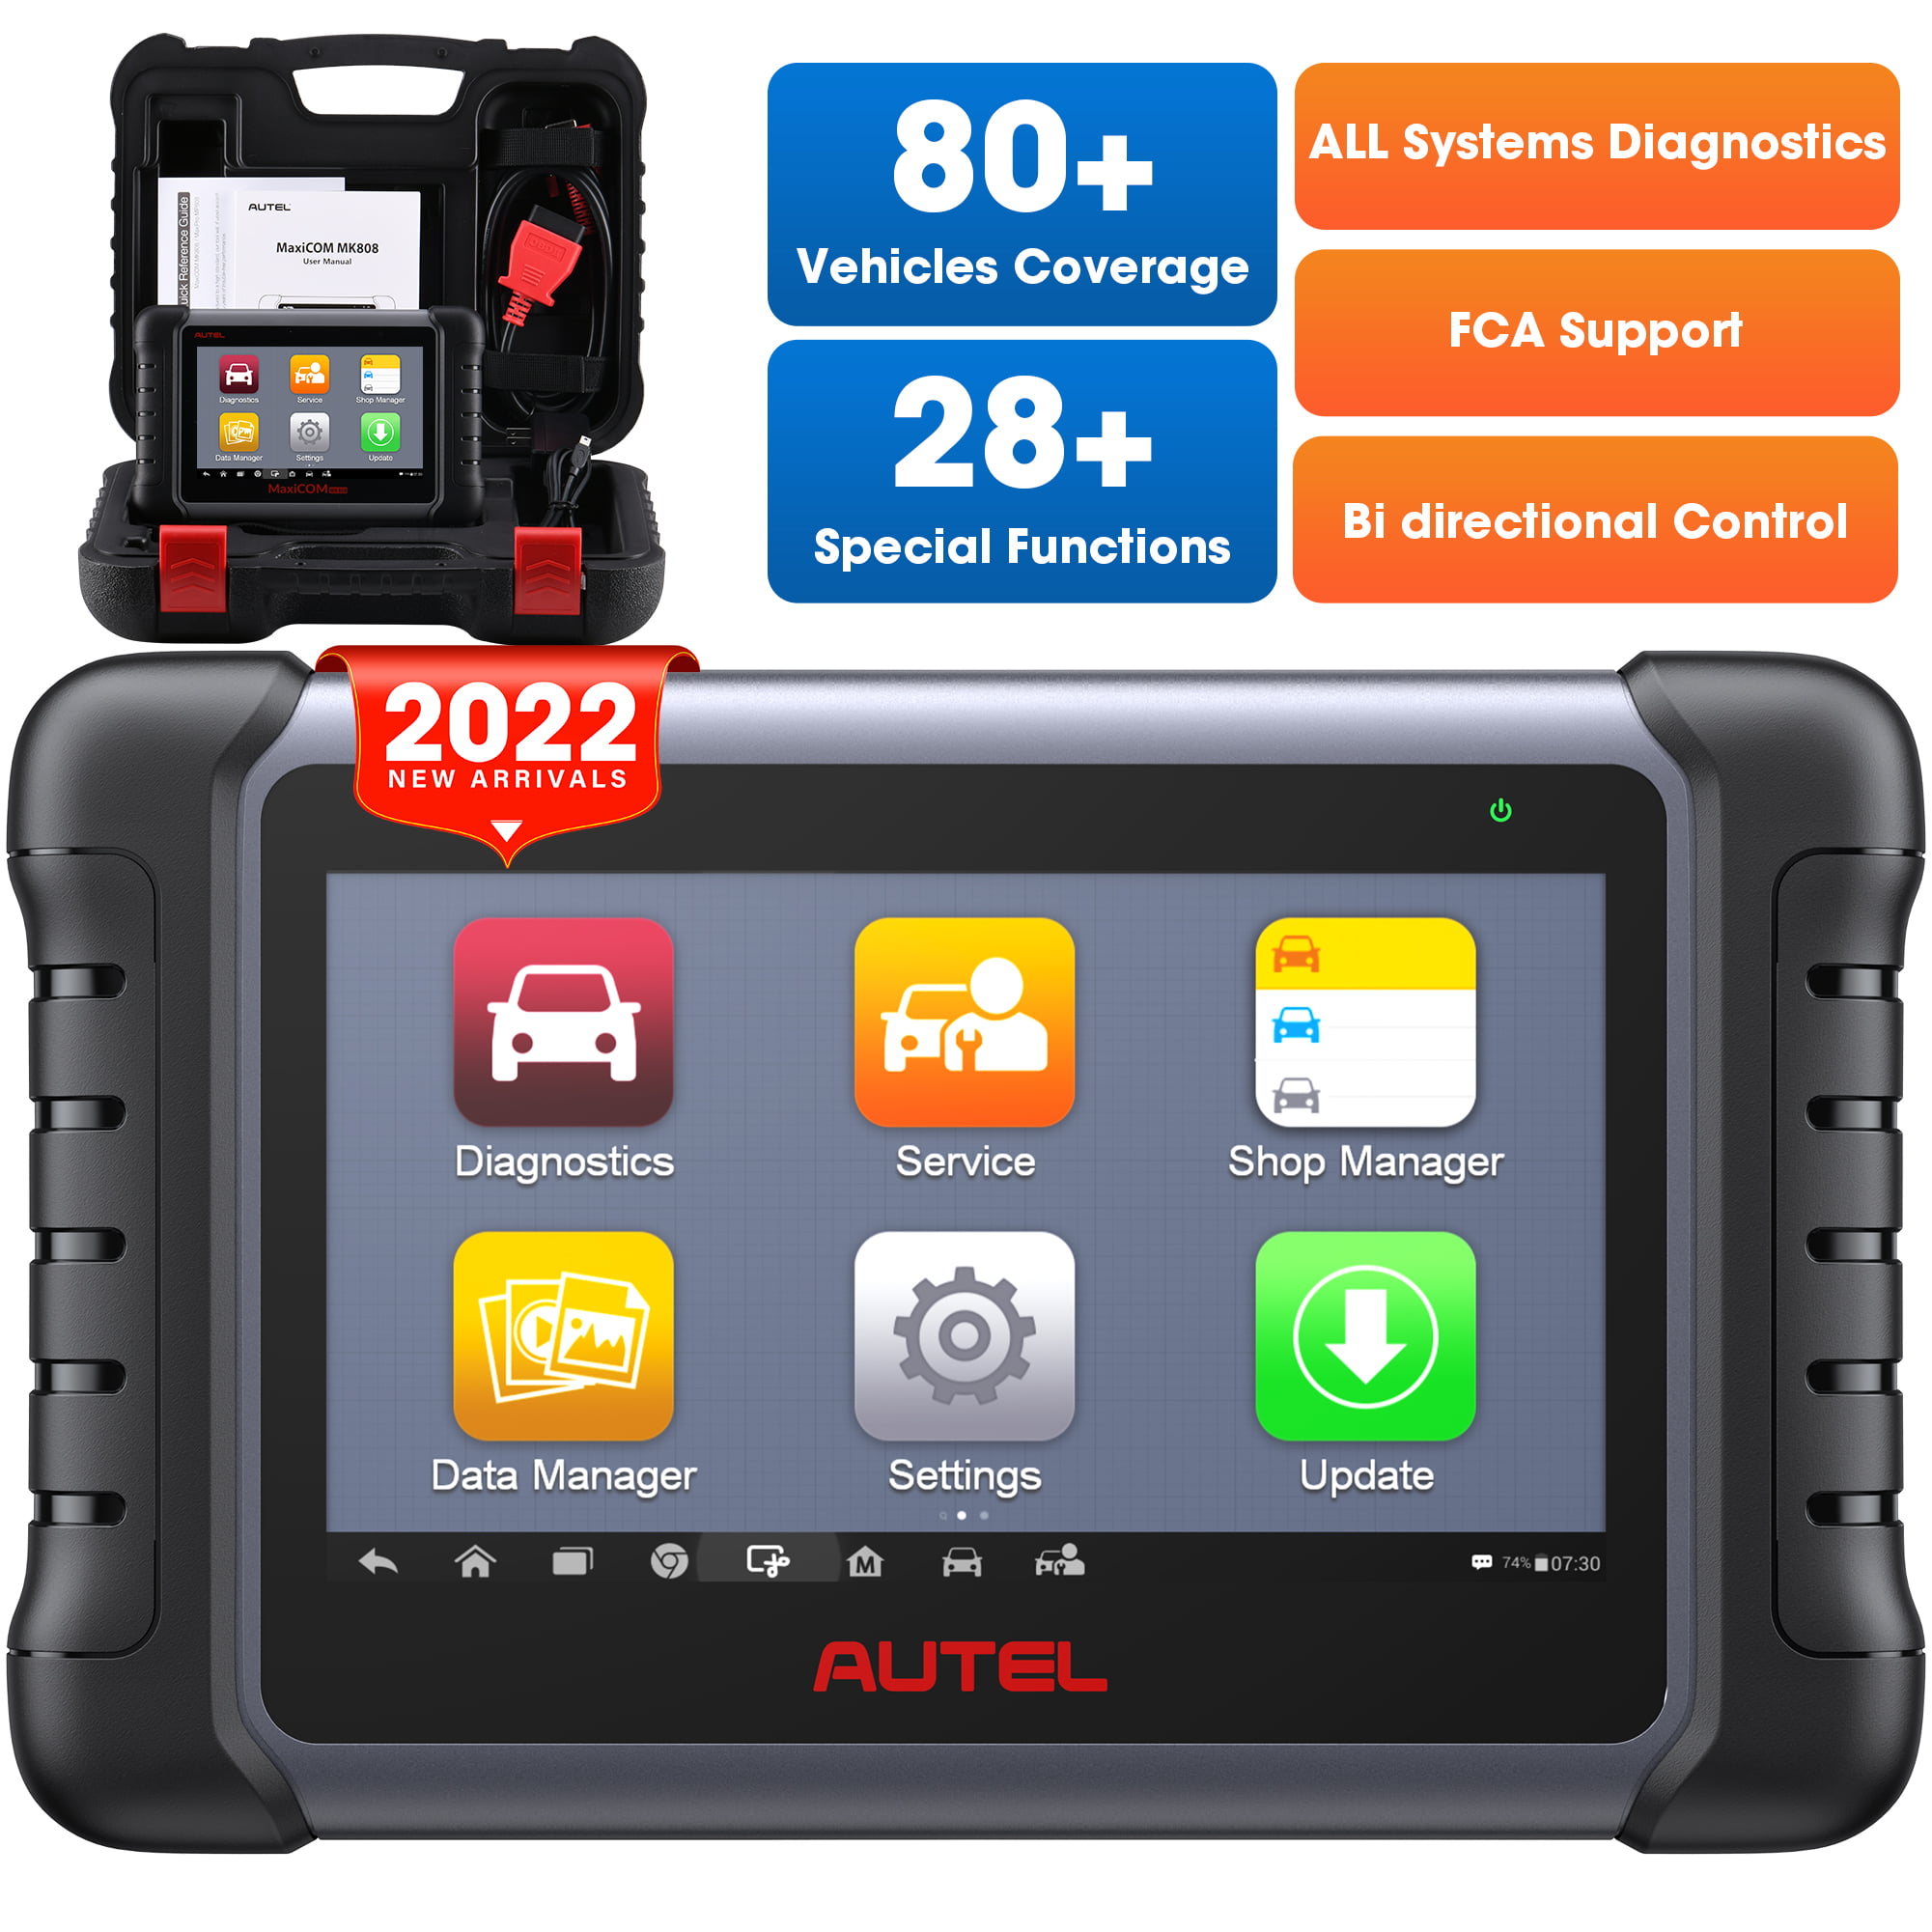 Autel OBD2 Car Code Reader|Professional and Flexible Automotive Scan Tool for DIY Car and Truck Data and Diagnostics 